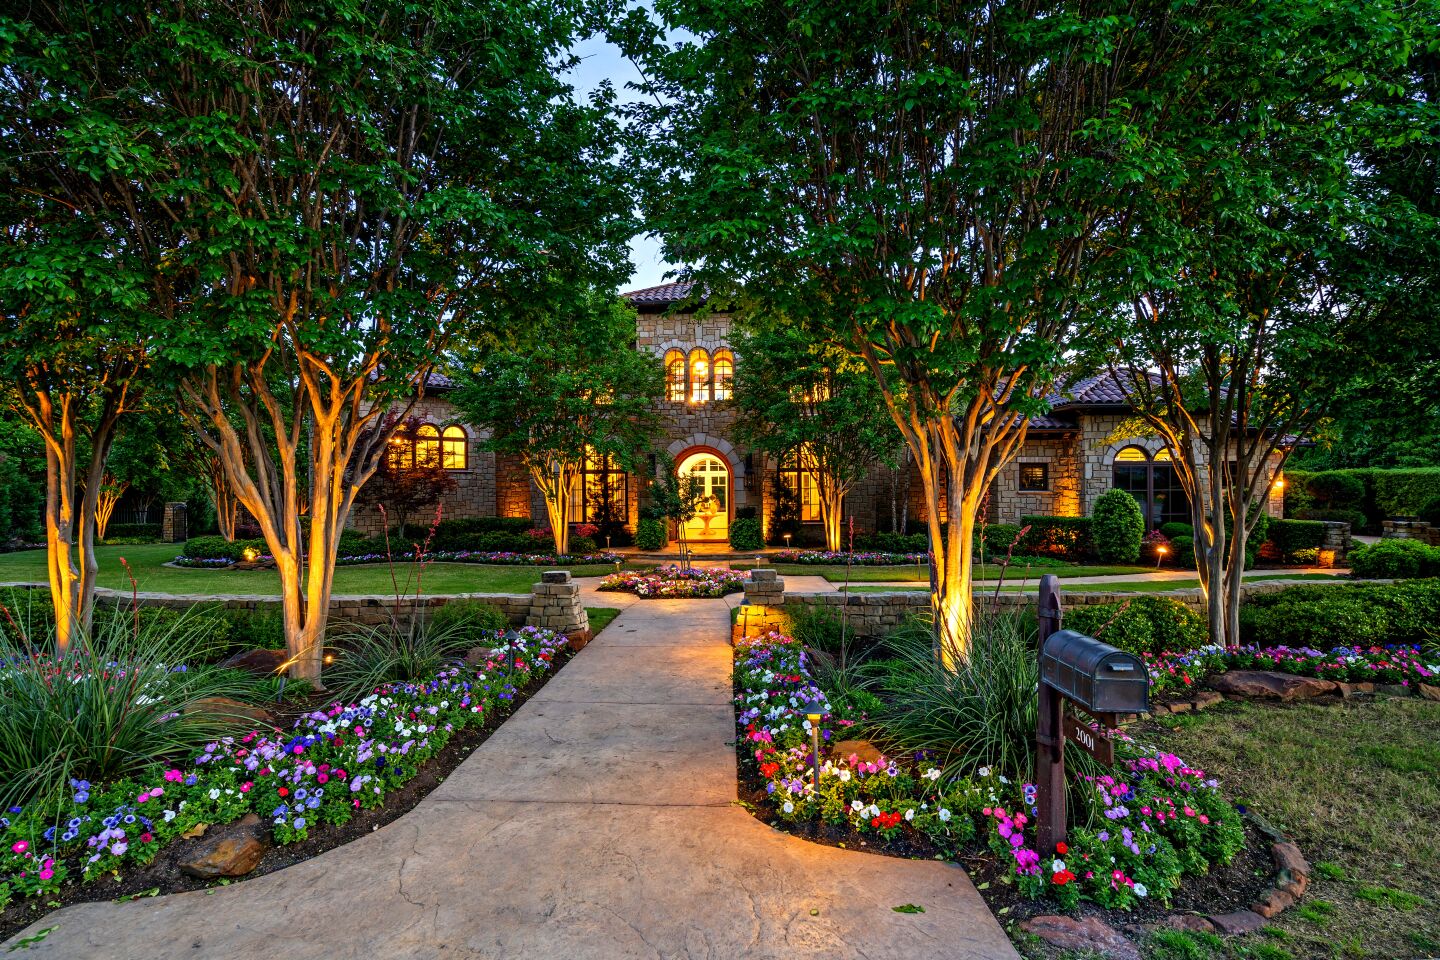 Former Dallas Cowboys tight end Jason Witten has put his home field in Westlake, Texas, on the market for $4.685 million.